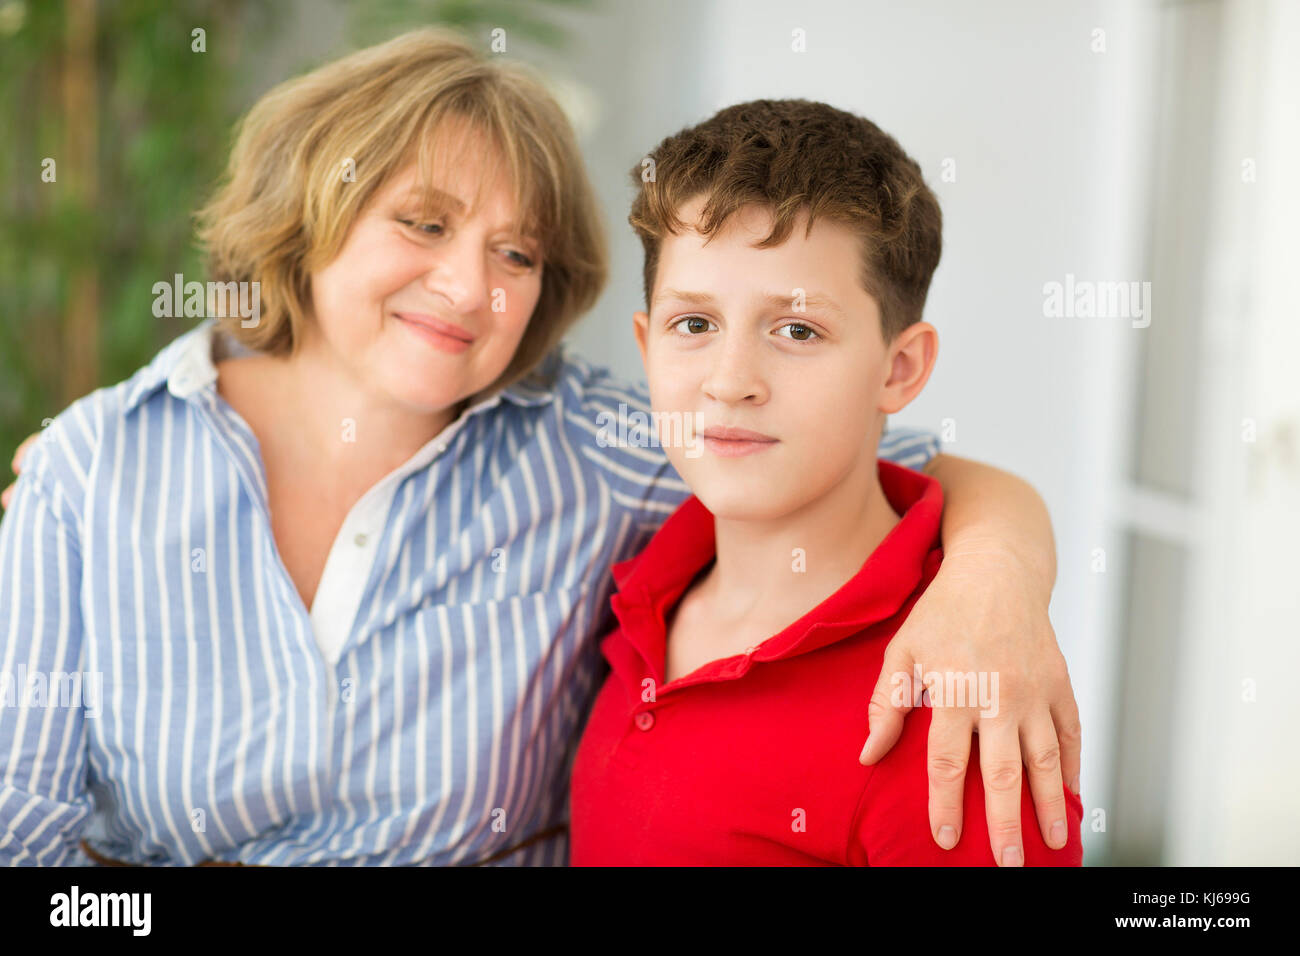 Mid-age woman with teen boy. Happy family concept Stock Photo